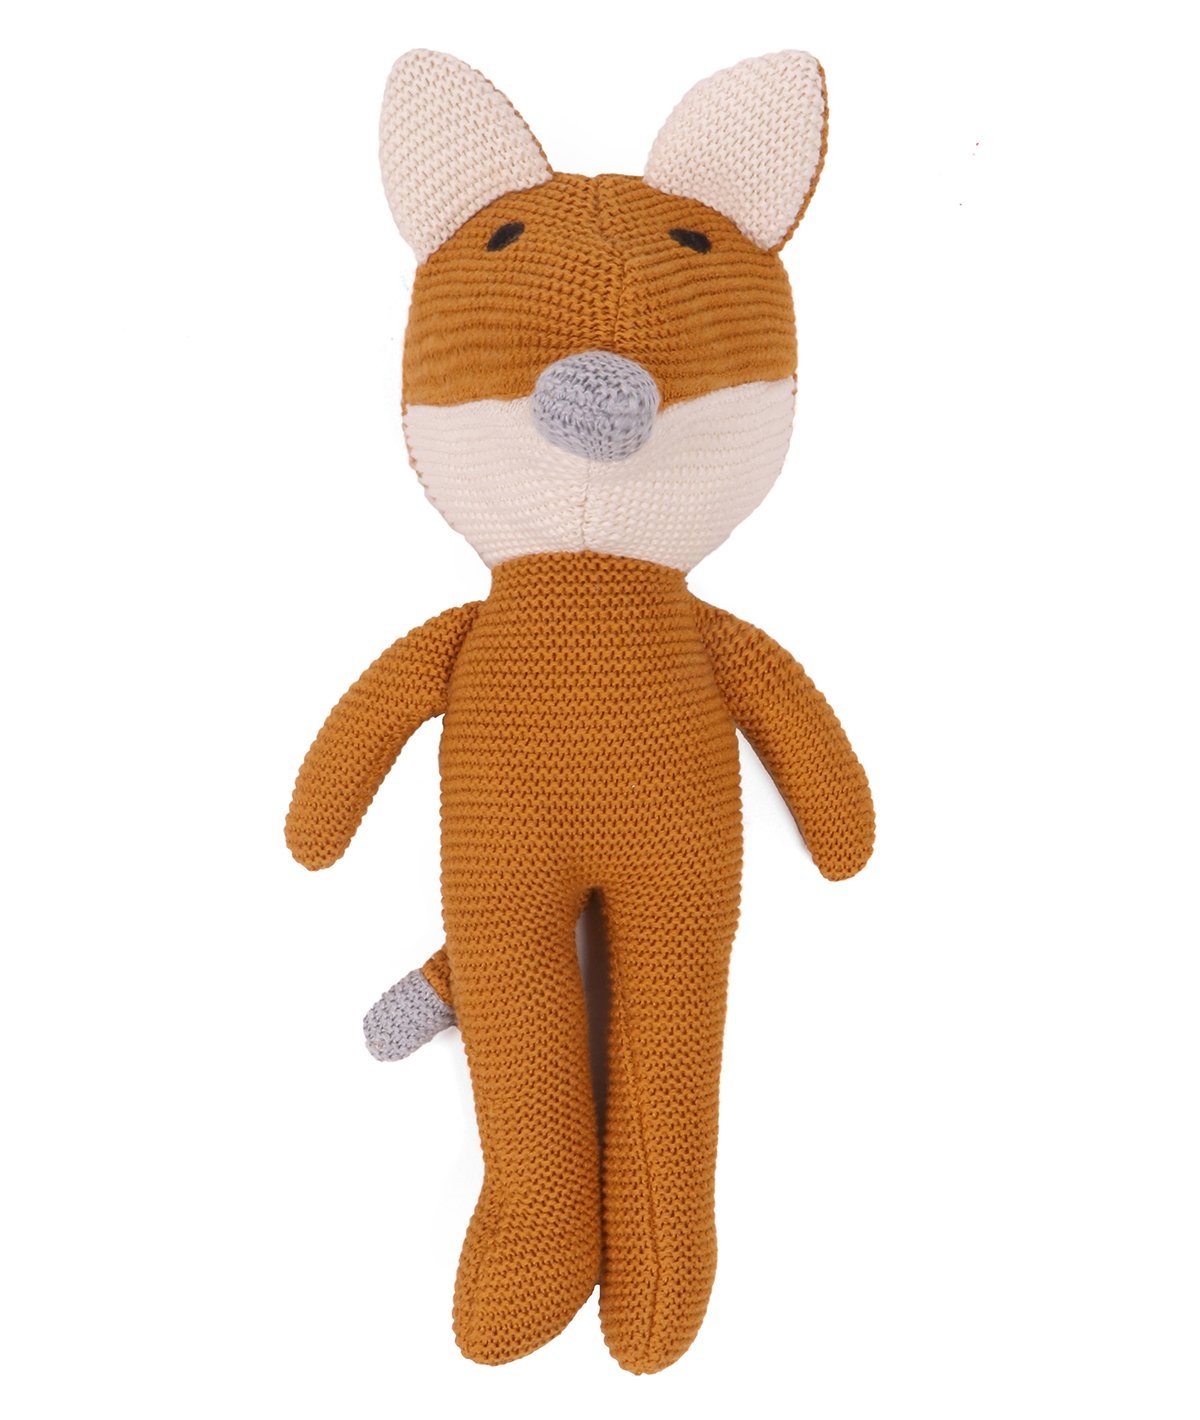 Jolly fox Mustard & Natural 100% Cotton Knitted Stuffed Soft Toy for Babies / Kids